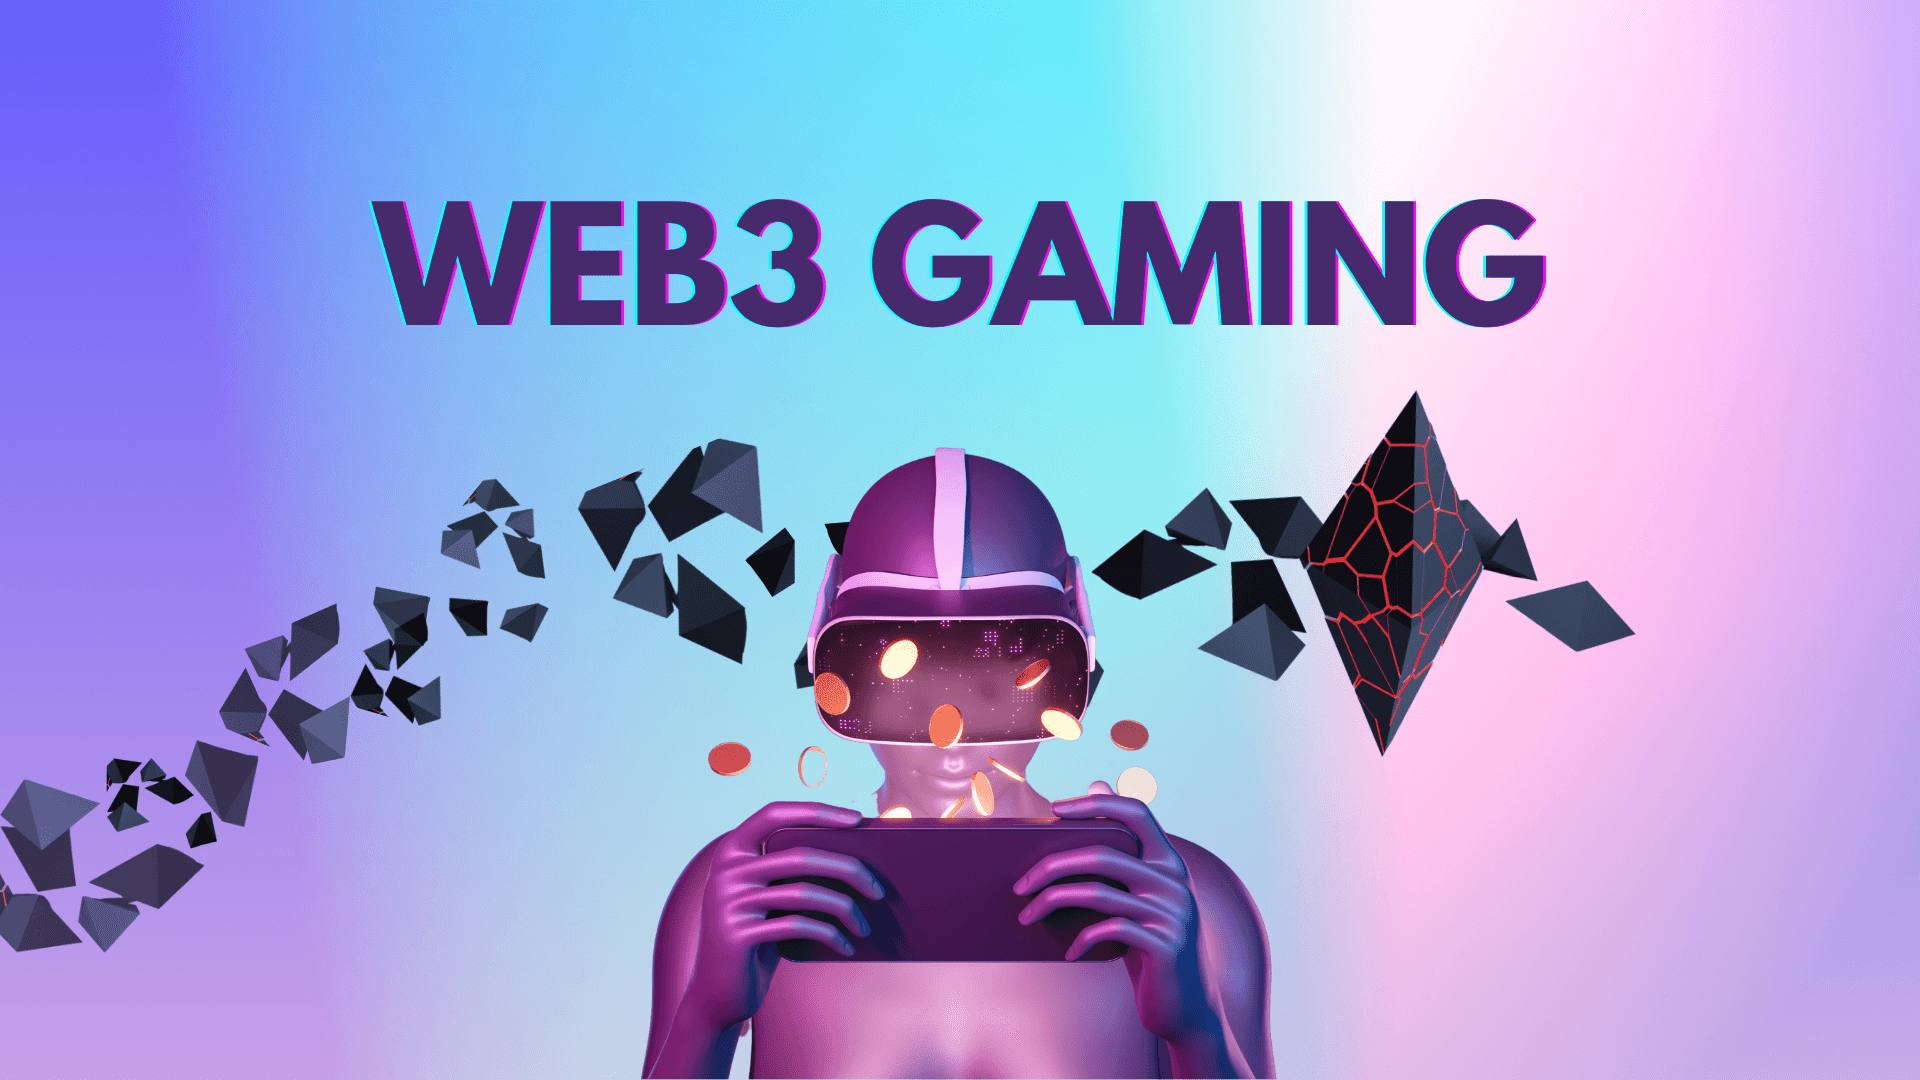 Unveiling Our Revolutionary Web3 Gaming Experience: The Progressive Web App  is Now Live!, by Nakamoto.Games